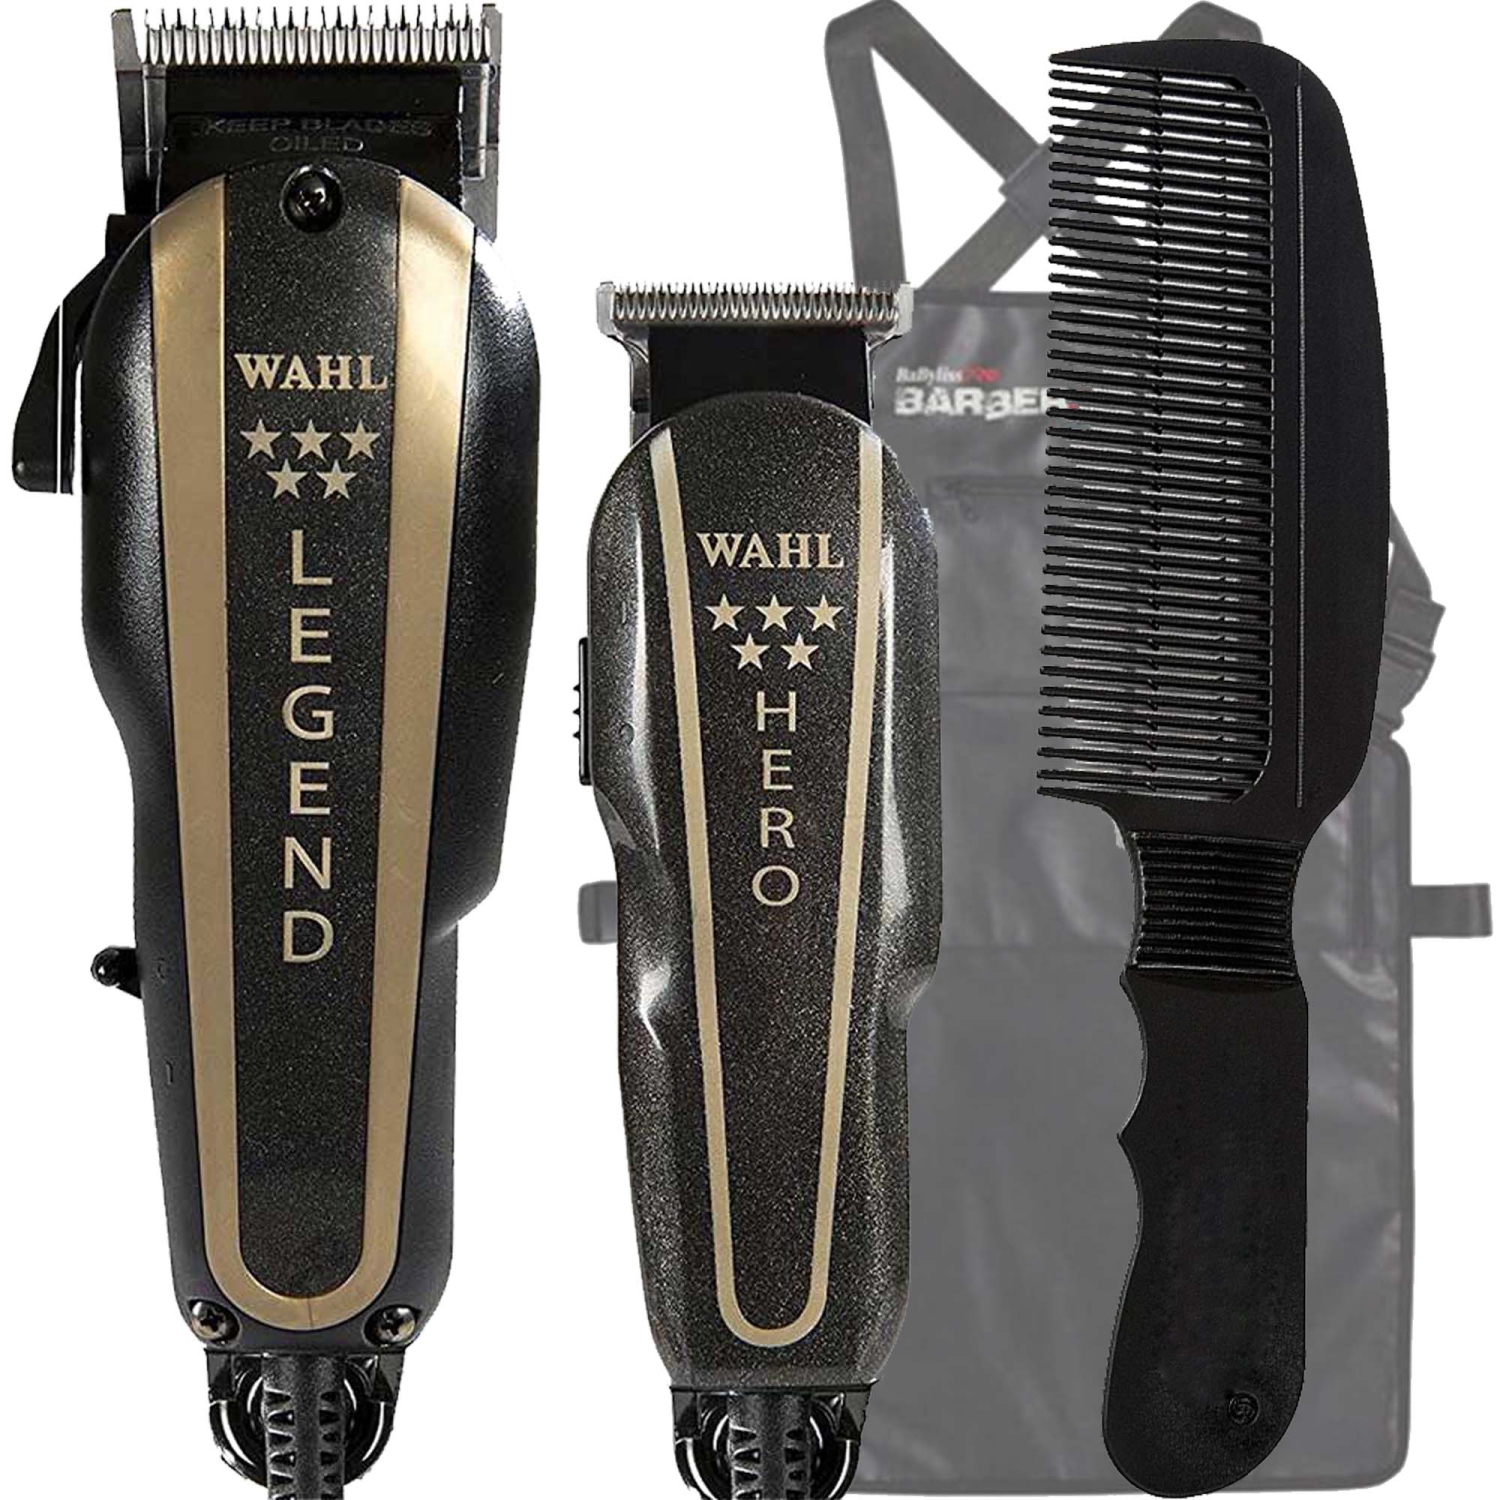 Wahl Professional Trimmer HERO & Hair Clipper LEGEND 5 Star Combo + Apron + Comb